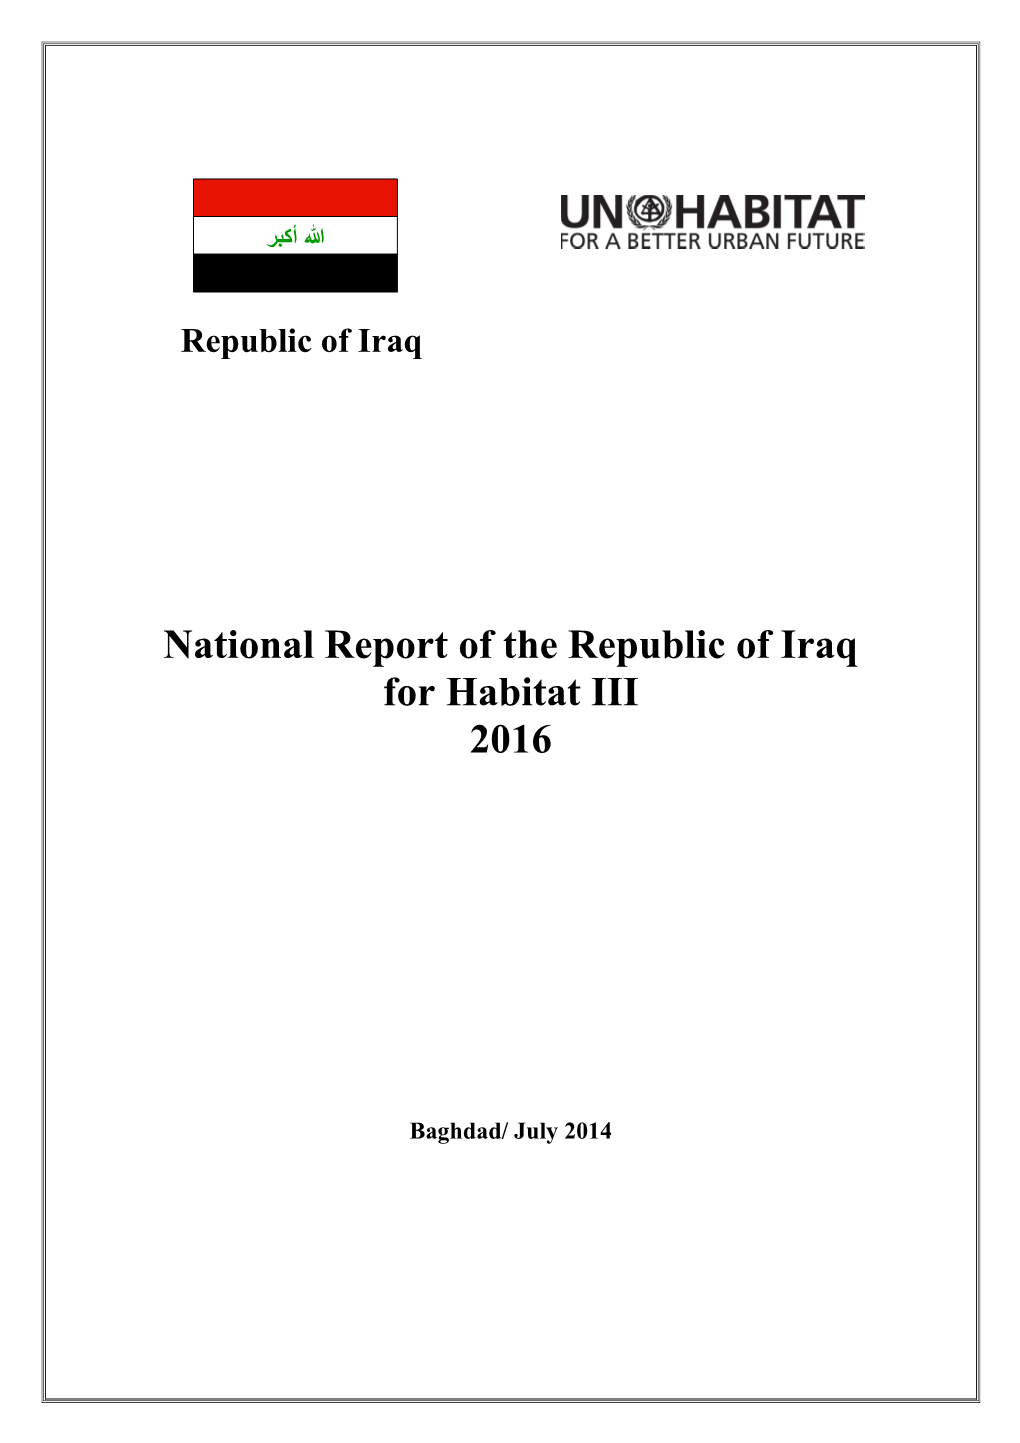 National Report of the Republic of Iraq for Habitat III 2016